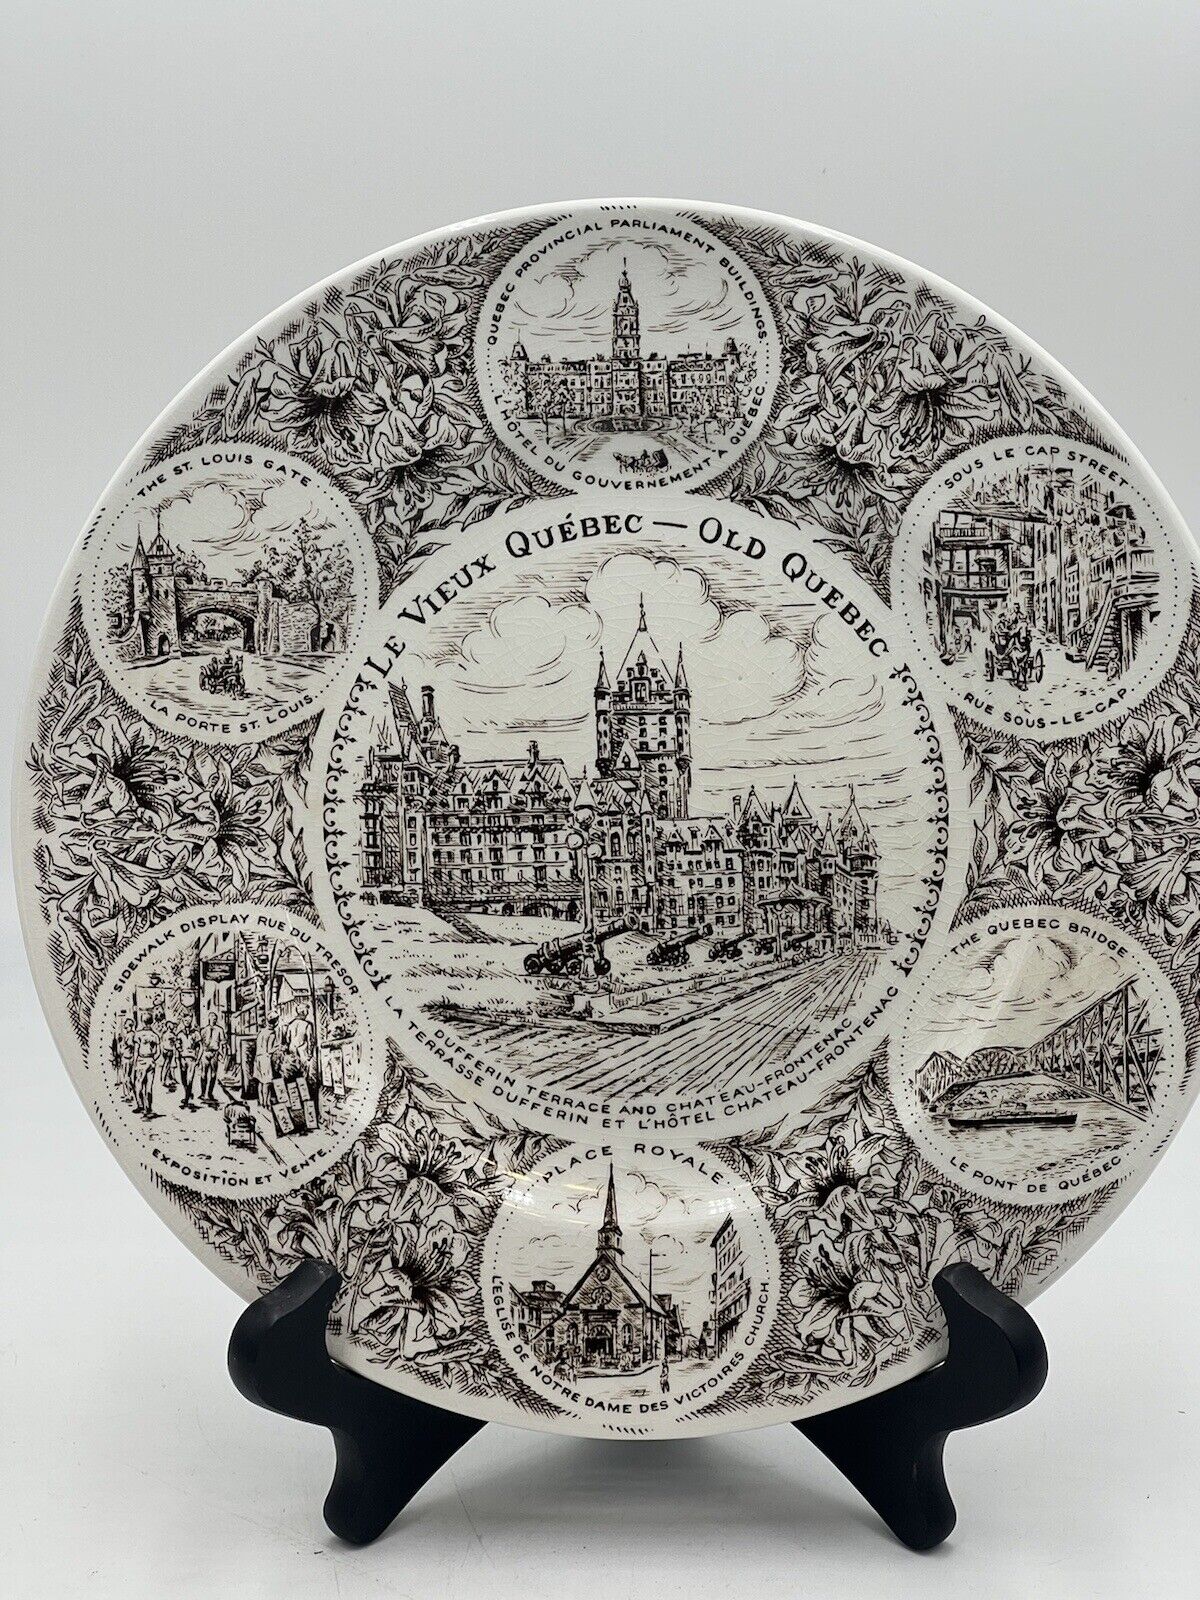 Le Vieux Quebec Old Quebec Collector Plate by Woods & Sons (England) Brown 10”